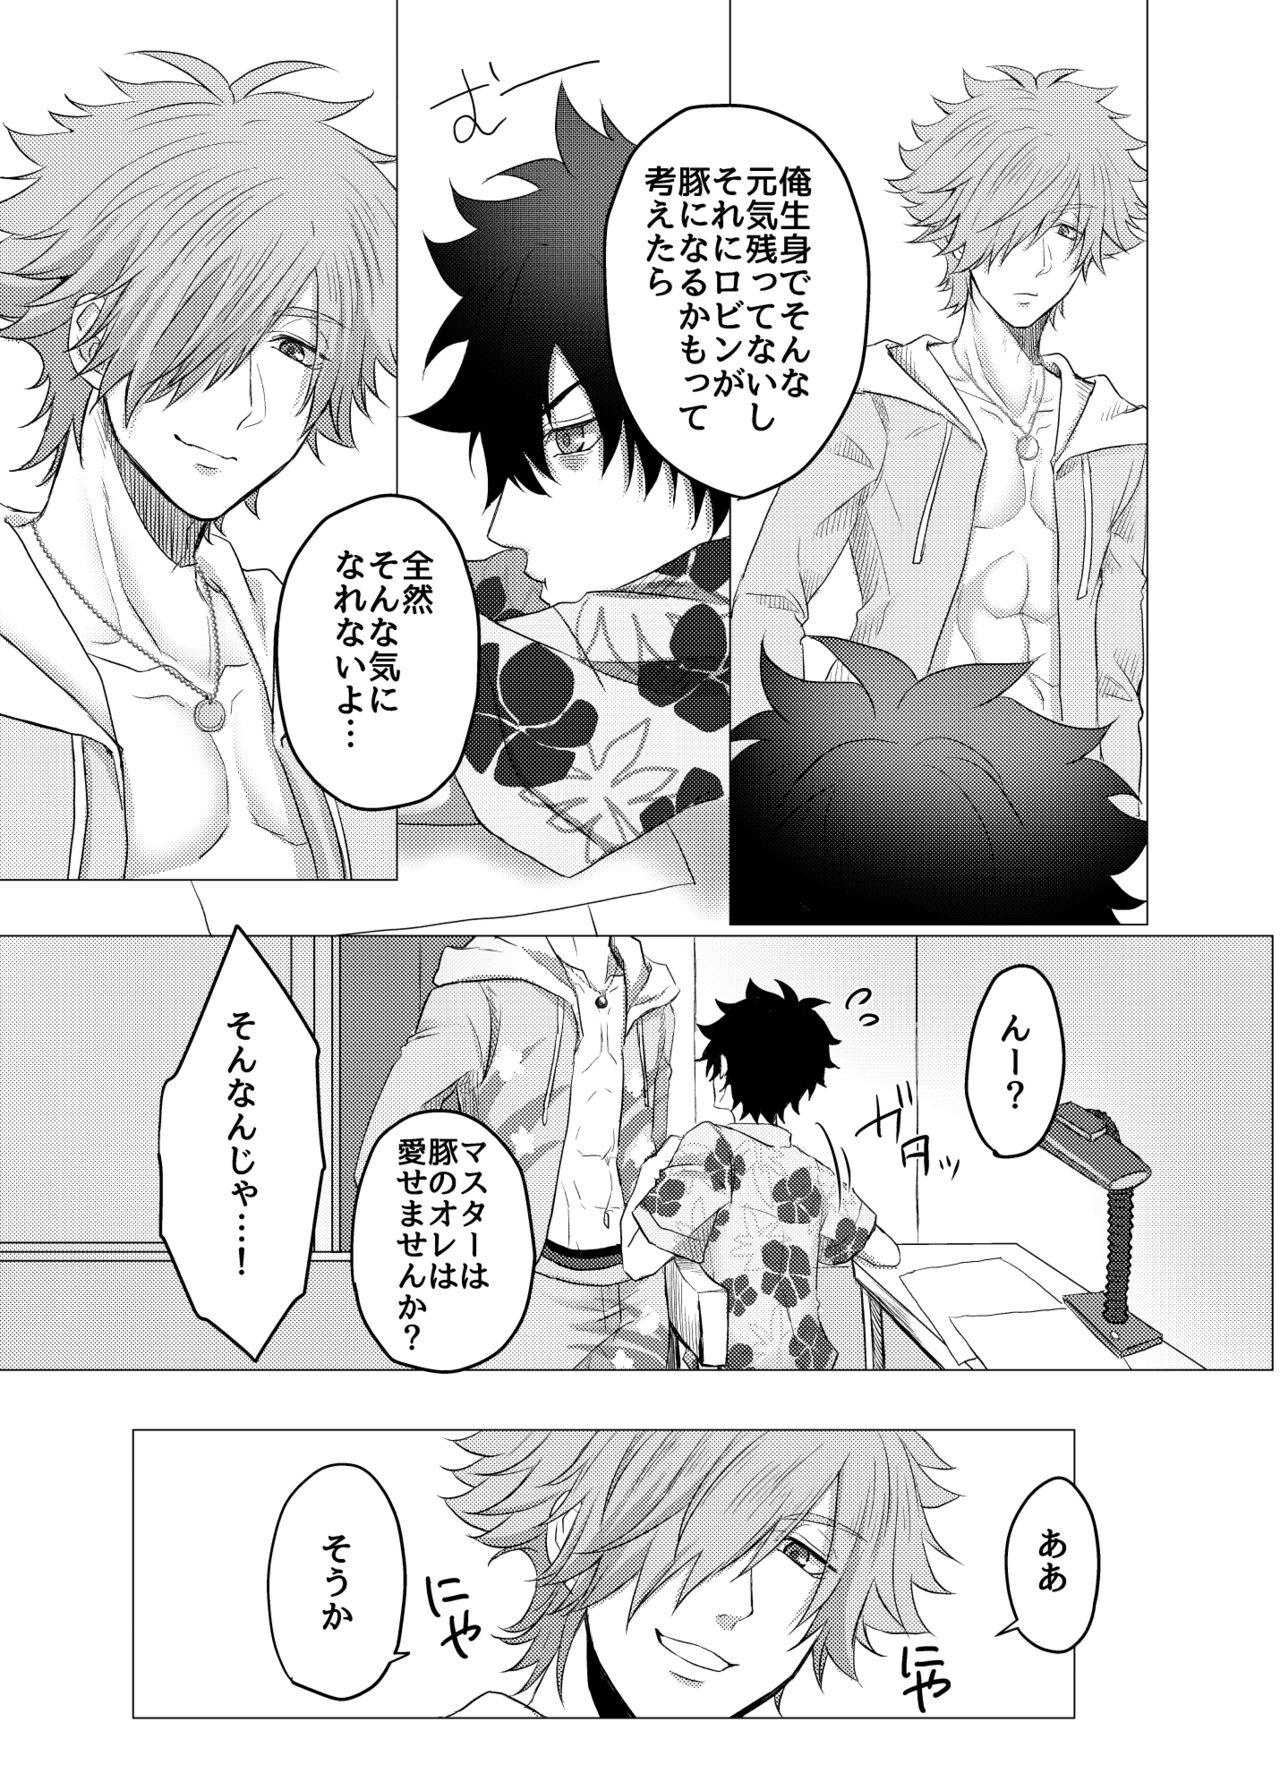 Shaved Luluhawa Onii-san to Issho♥ - Fate grand order Spy Camera - Page 4